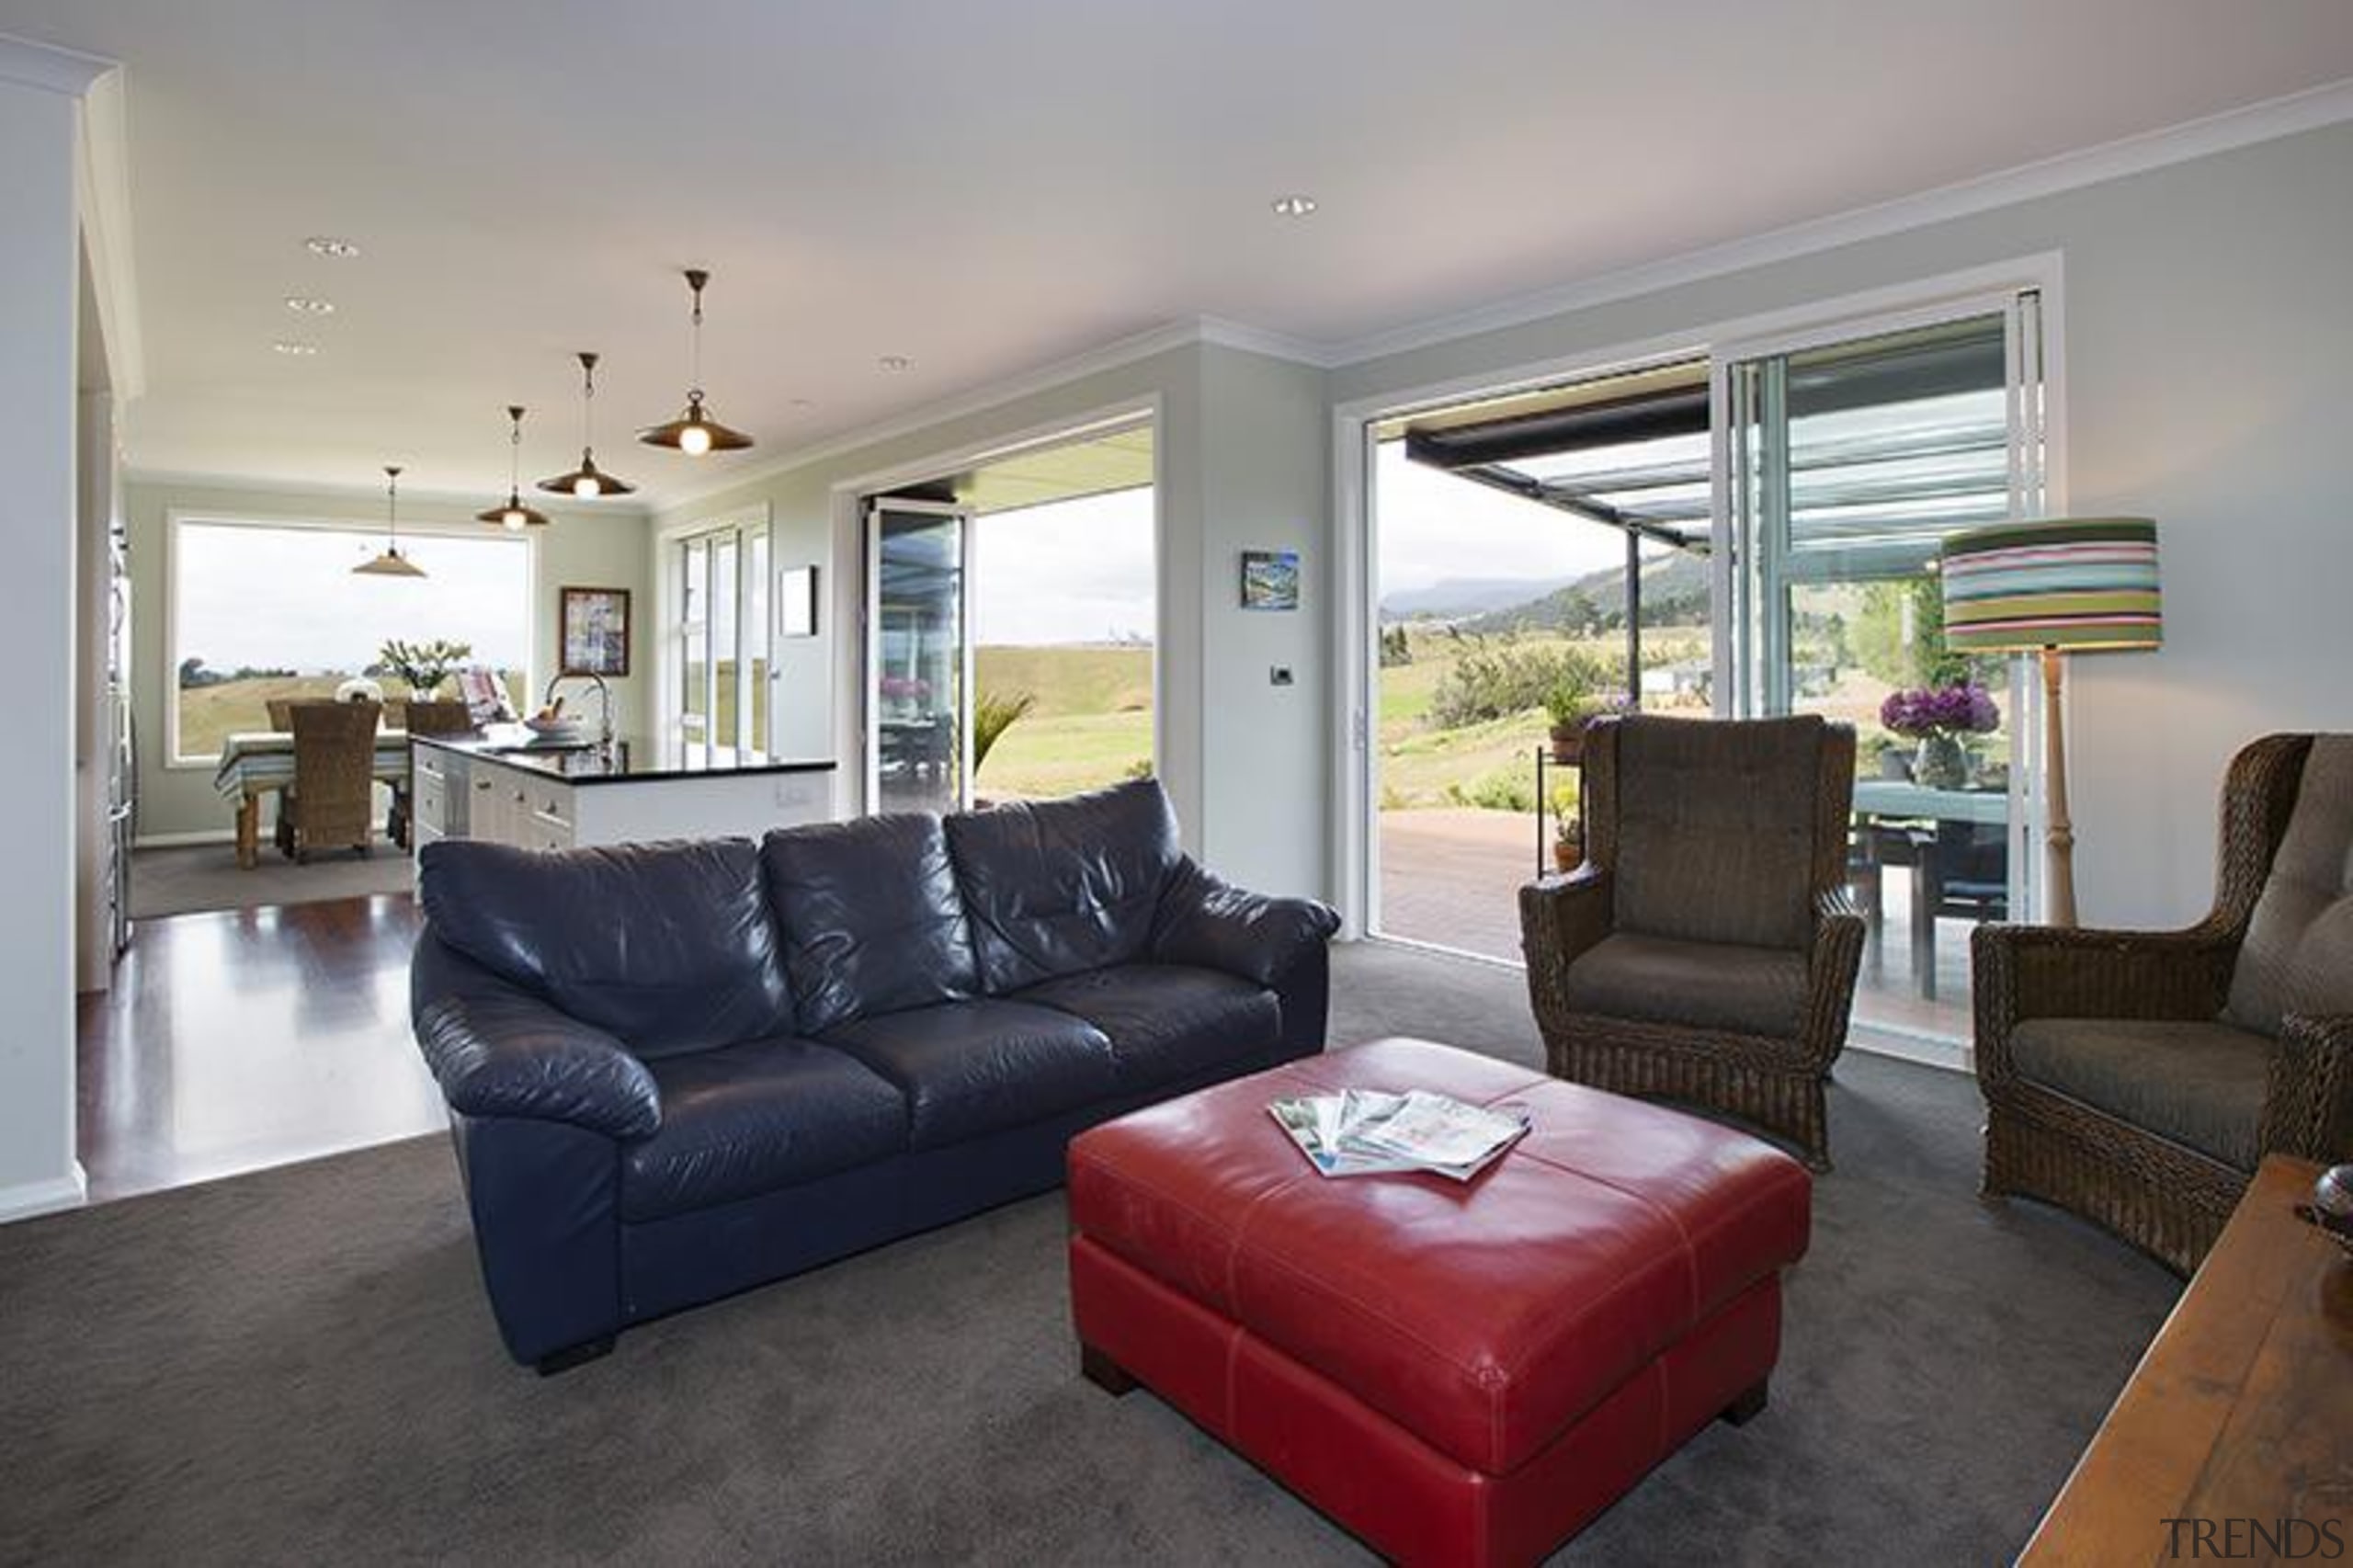 Fowler Homes Tauranga.Gold reserve winner and National finalist ceiling, home, house, interior design, living room, property, real estate, room, window, gray, black